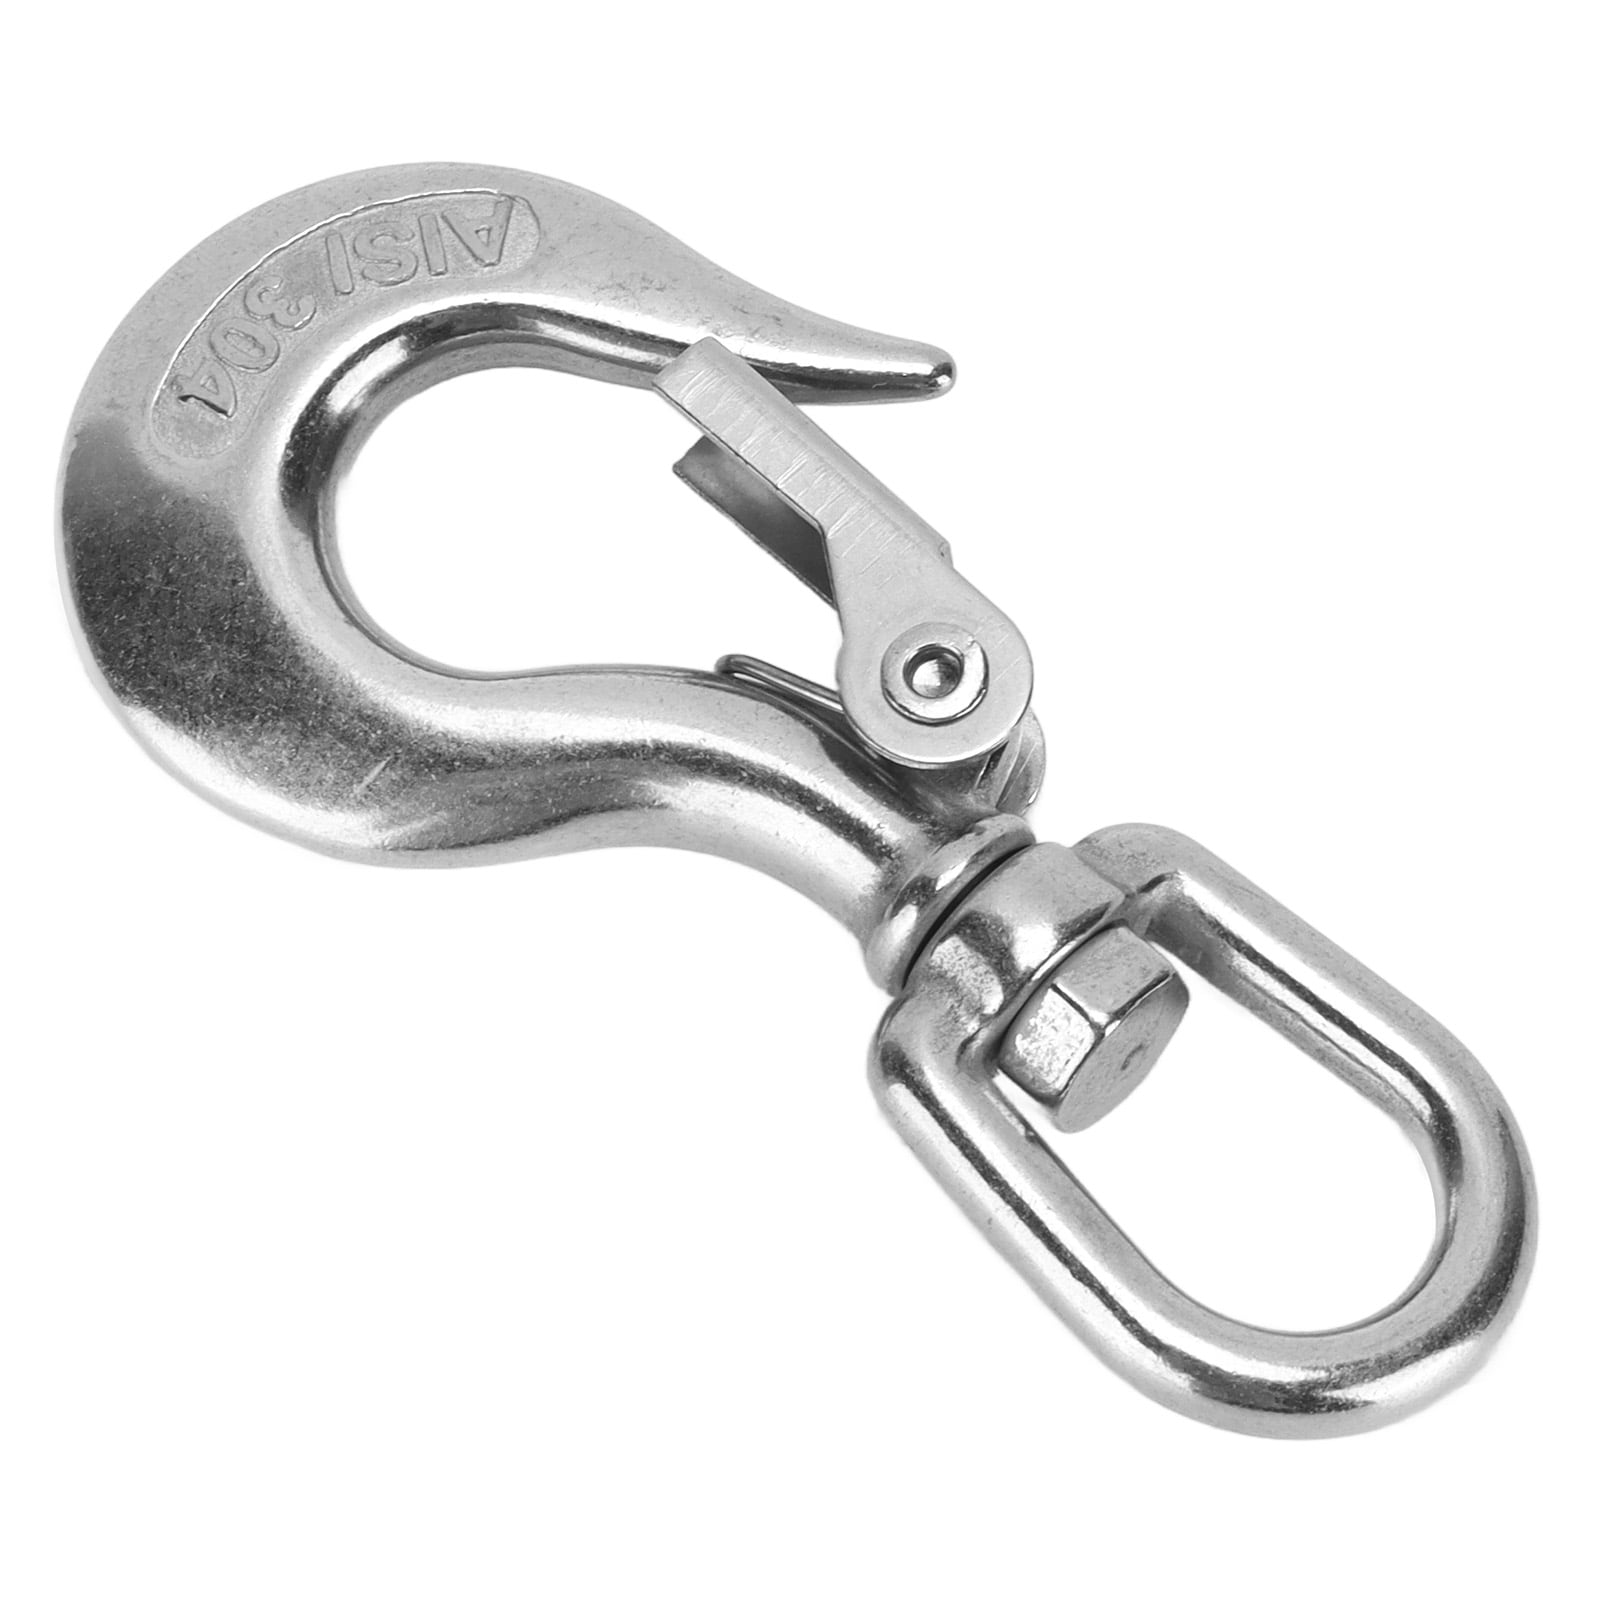 304 Stainless Steel Swivel Lifting Hook Steel Eye Hook with Latch Rigging Accessory, Size: 620KG, Pink